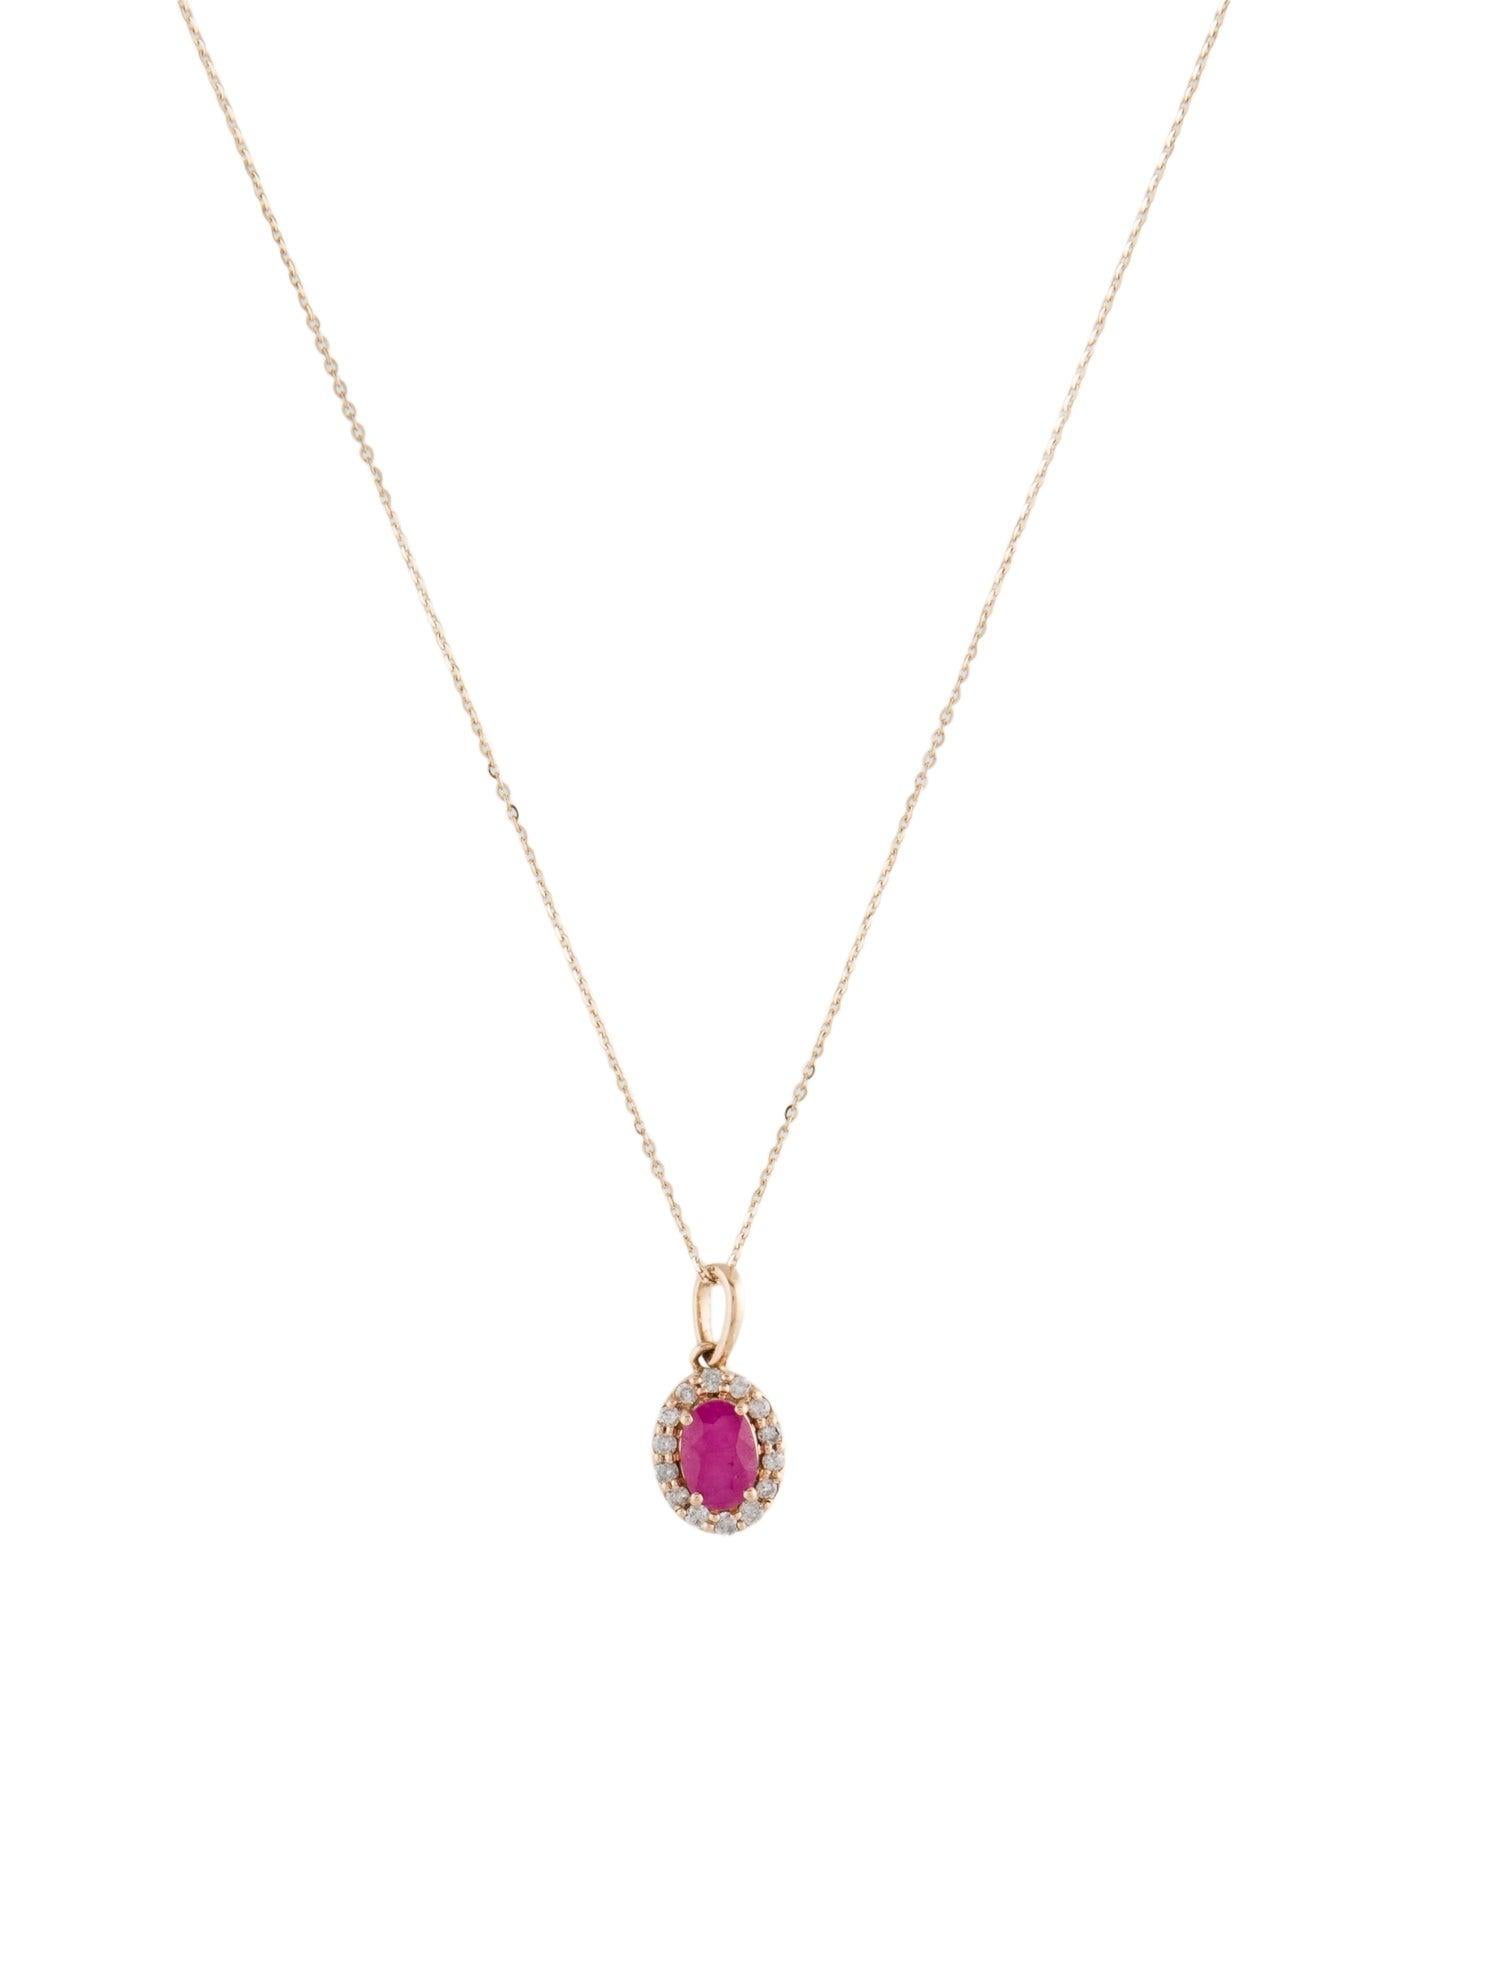 Immerse yourself in the enchanting allure of our Blooms of Passion collection with this exquisite Ruby and Diamond Pendant from Jeweltique. Crafted with precision and passion, this pendant encapsulates the spirit of vibrant blooms and the rich, red